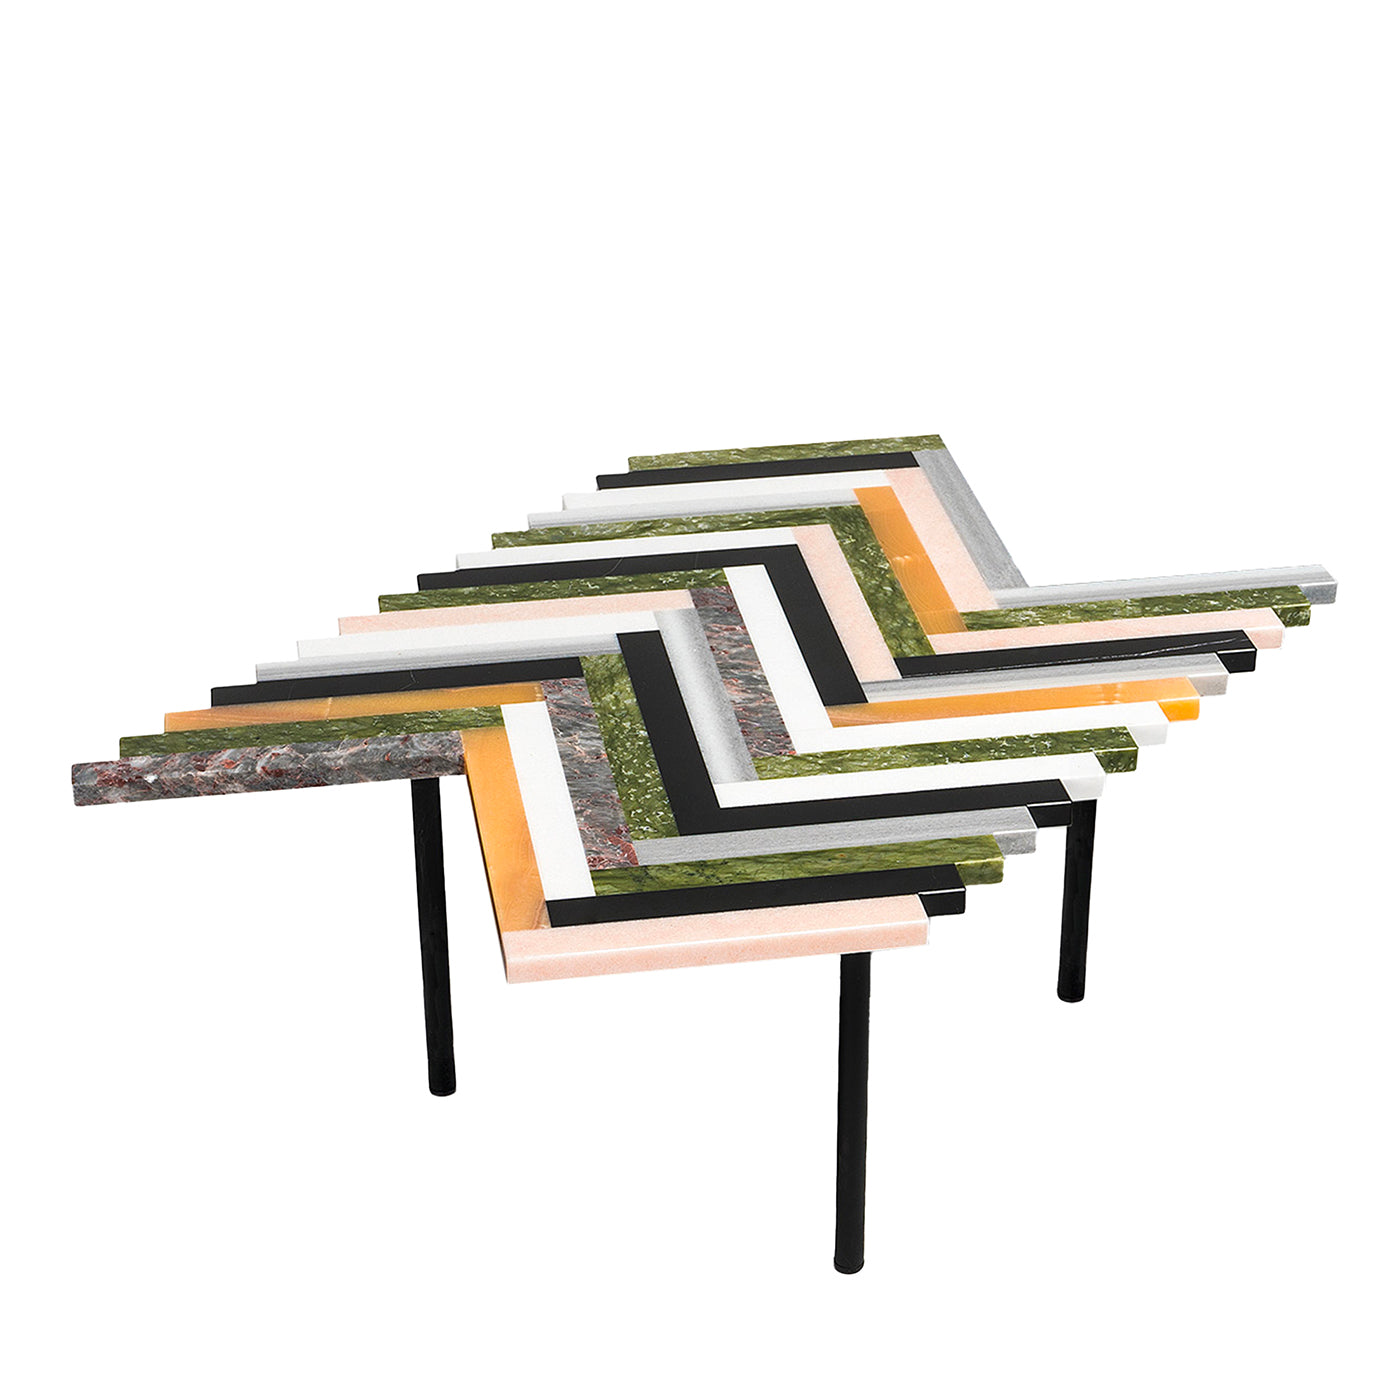 ZigZag Coffee Table S by Patricia Urquiola - Main view